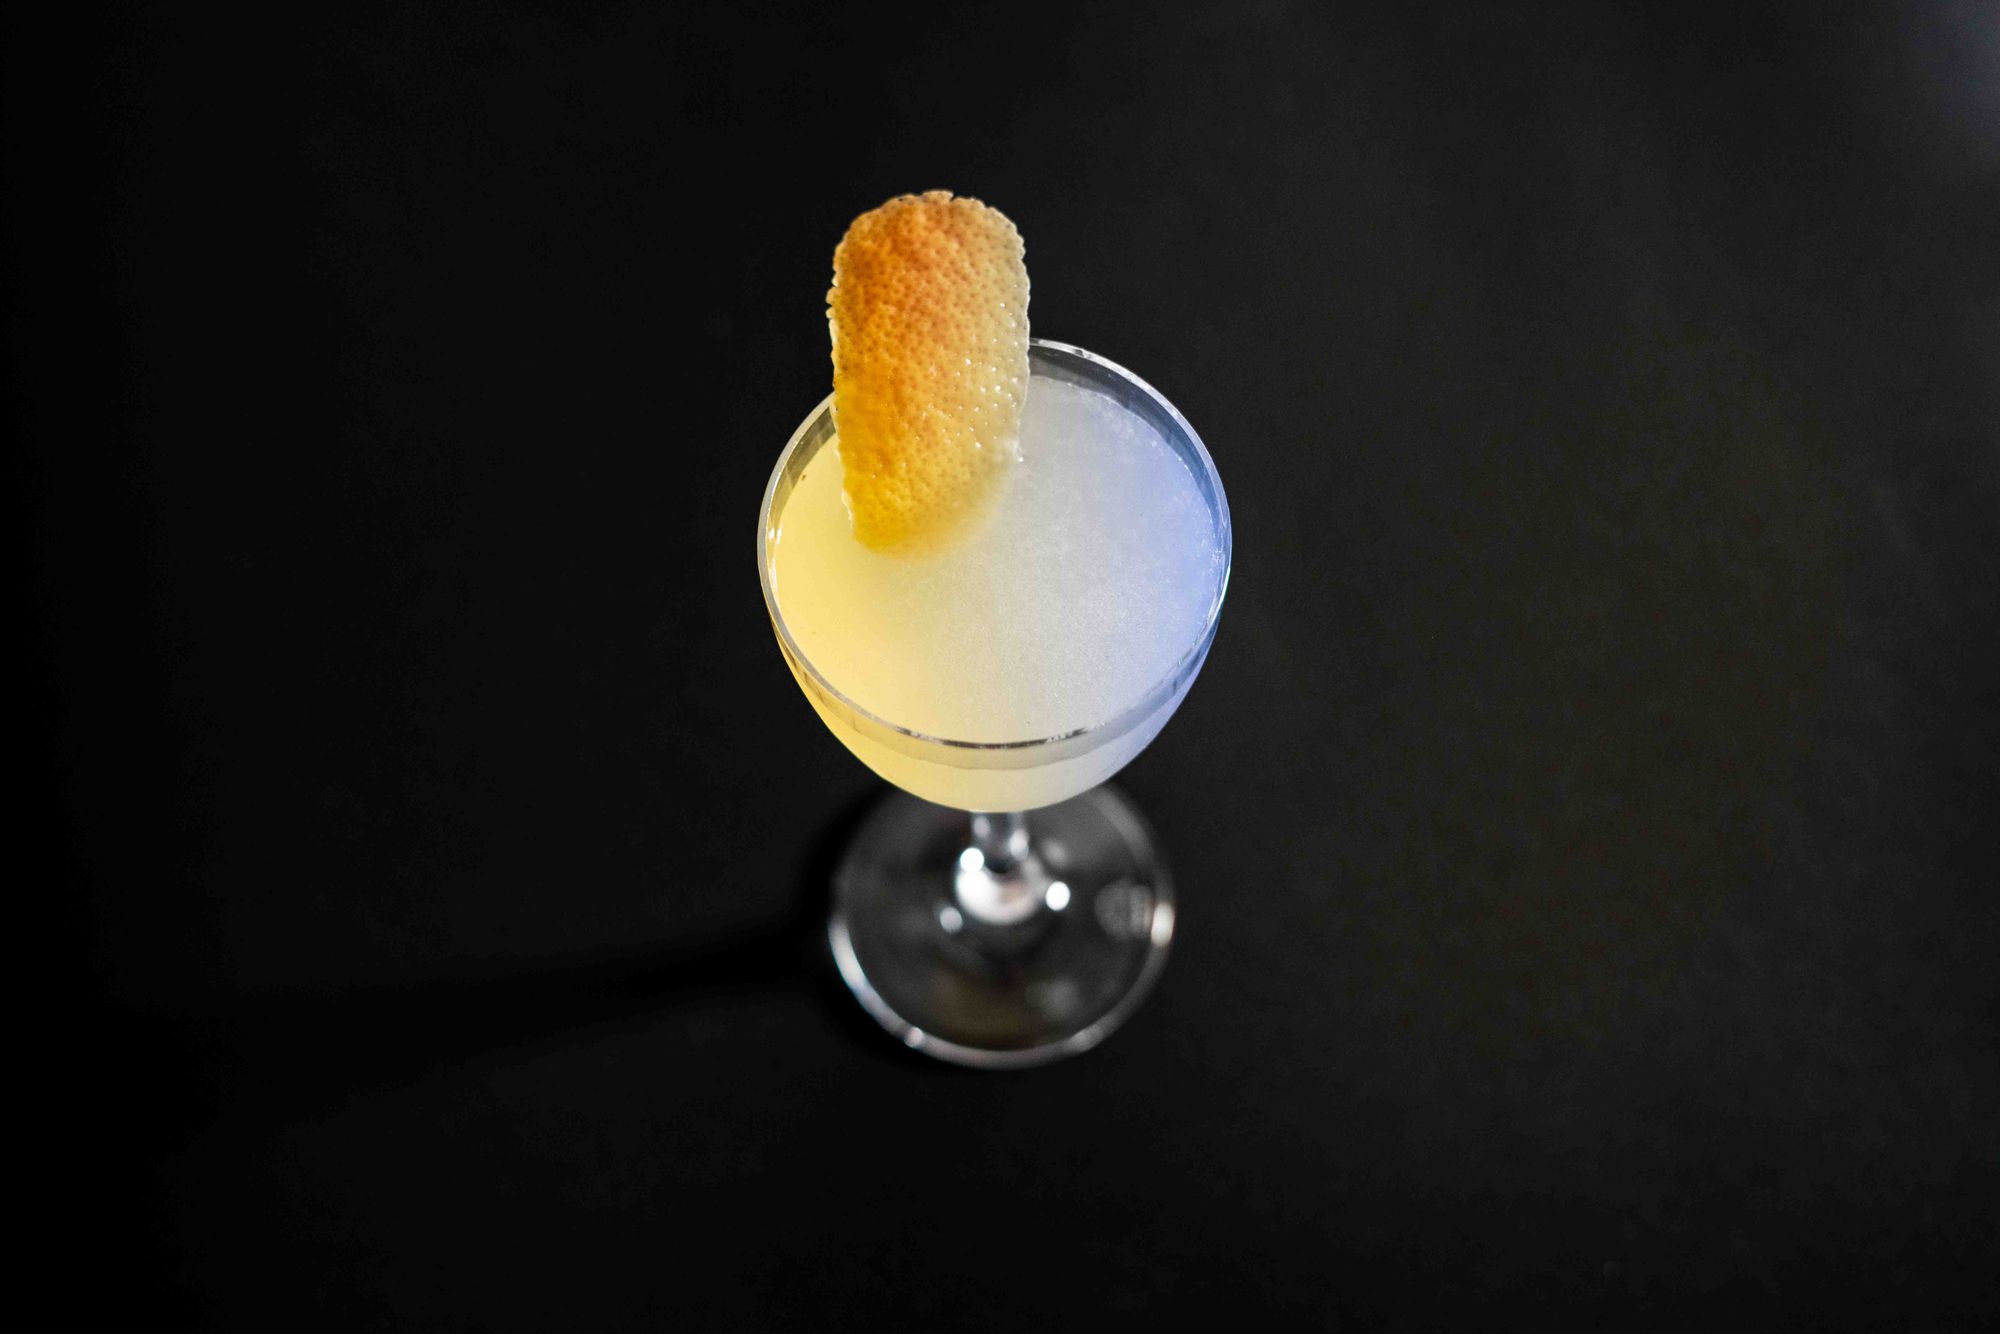 The London Calling cocktail: a modern classic created in... the 1930s?